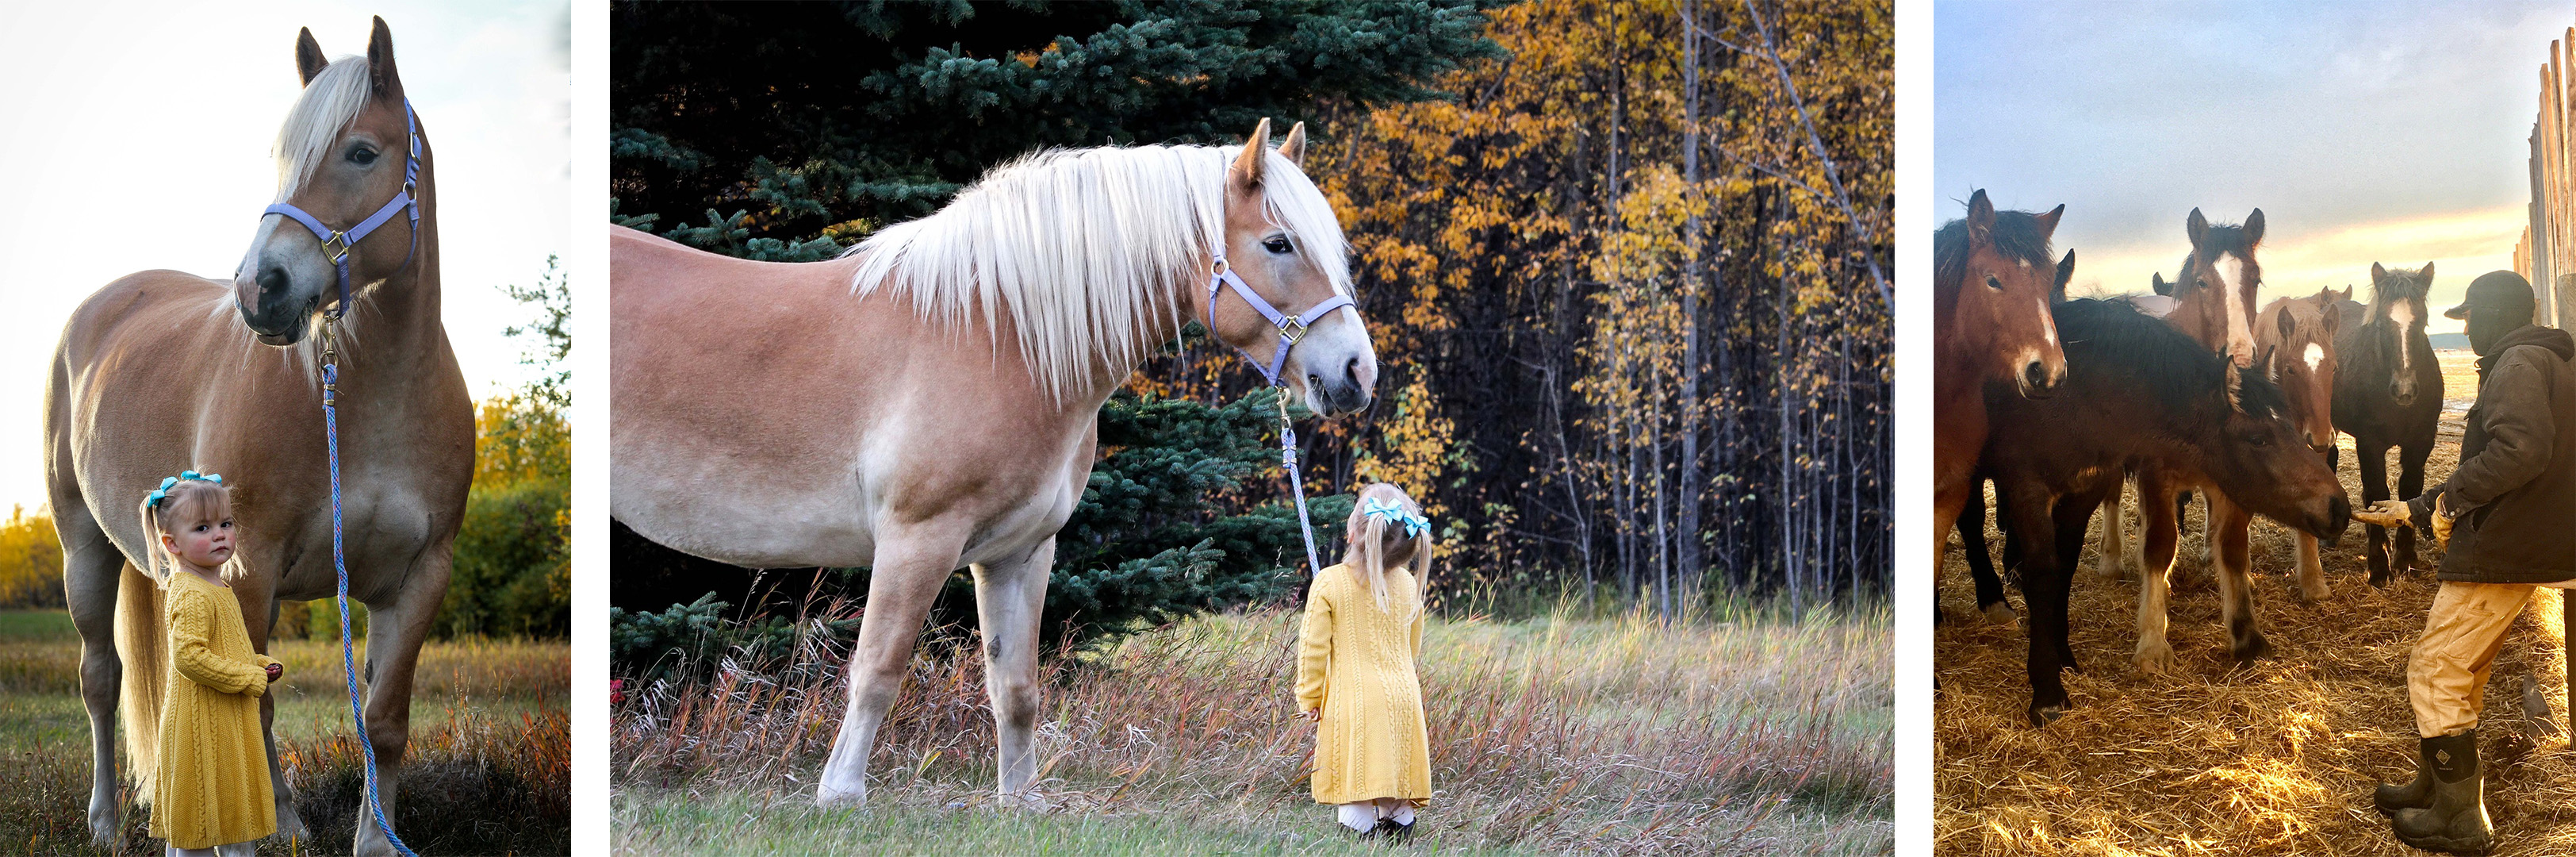 Image of girl and horse and horses